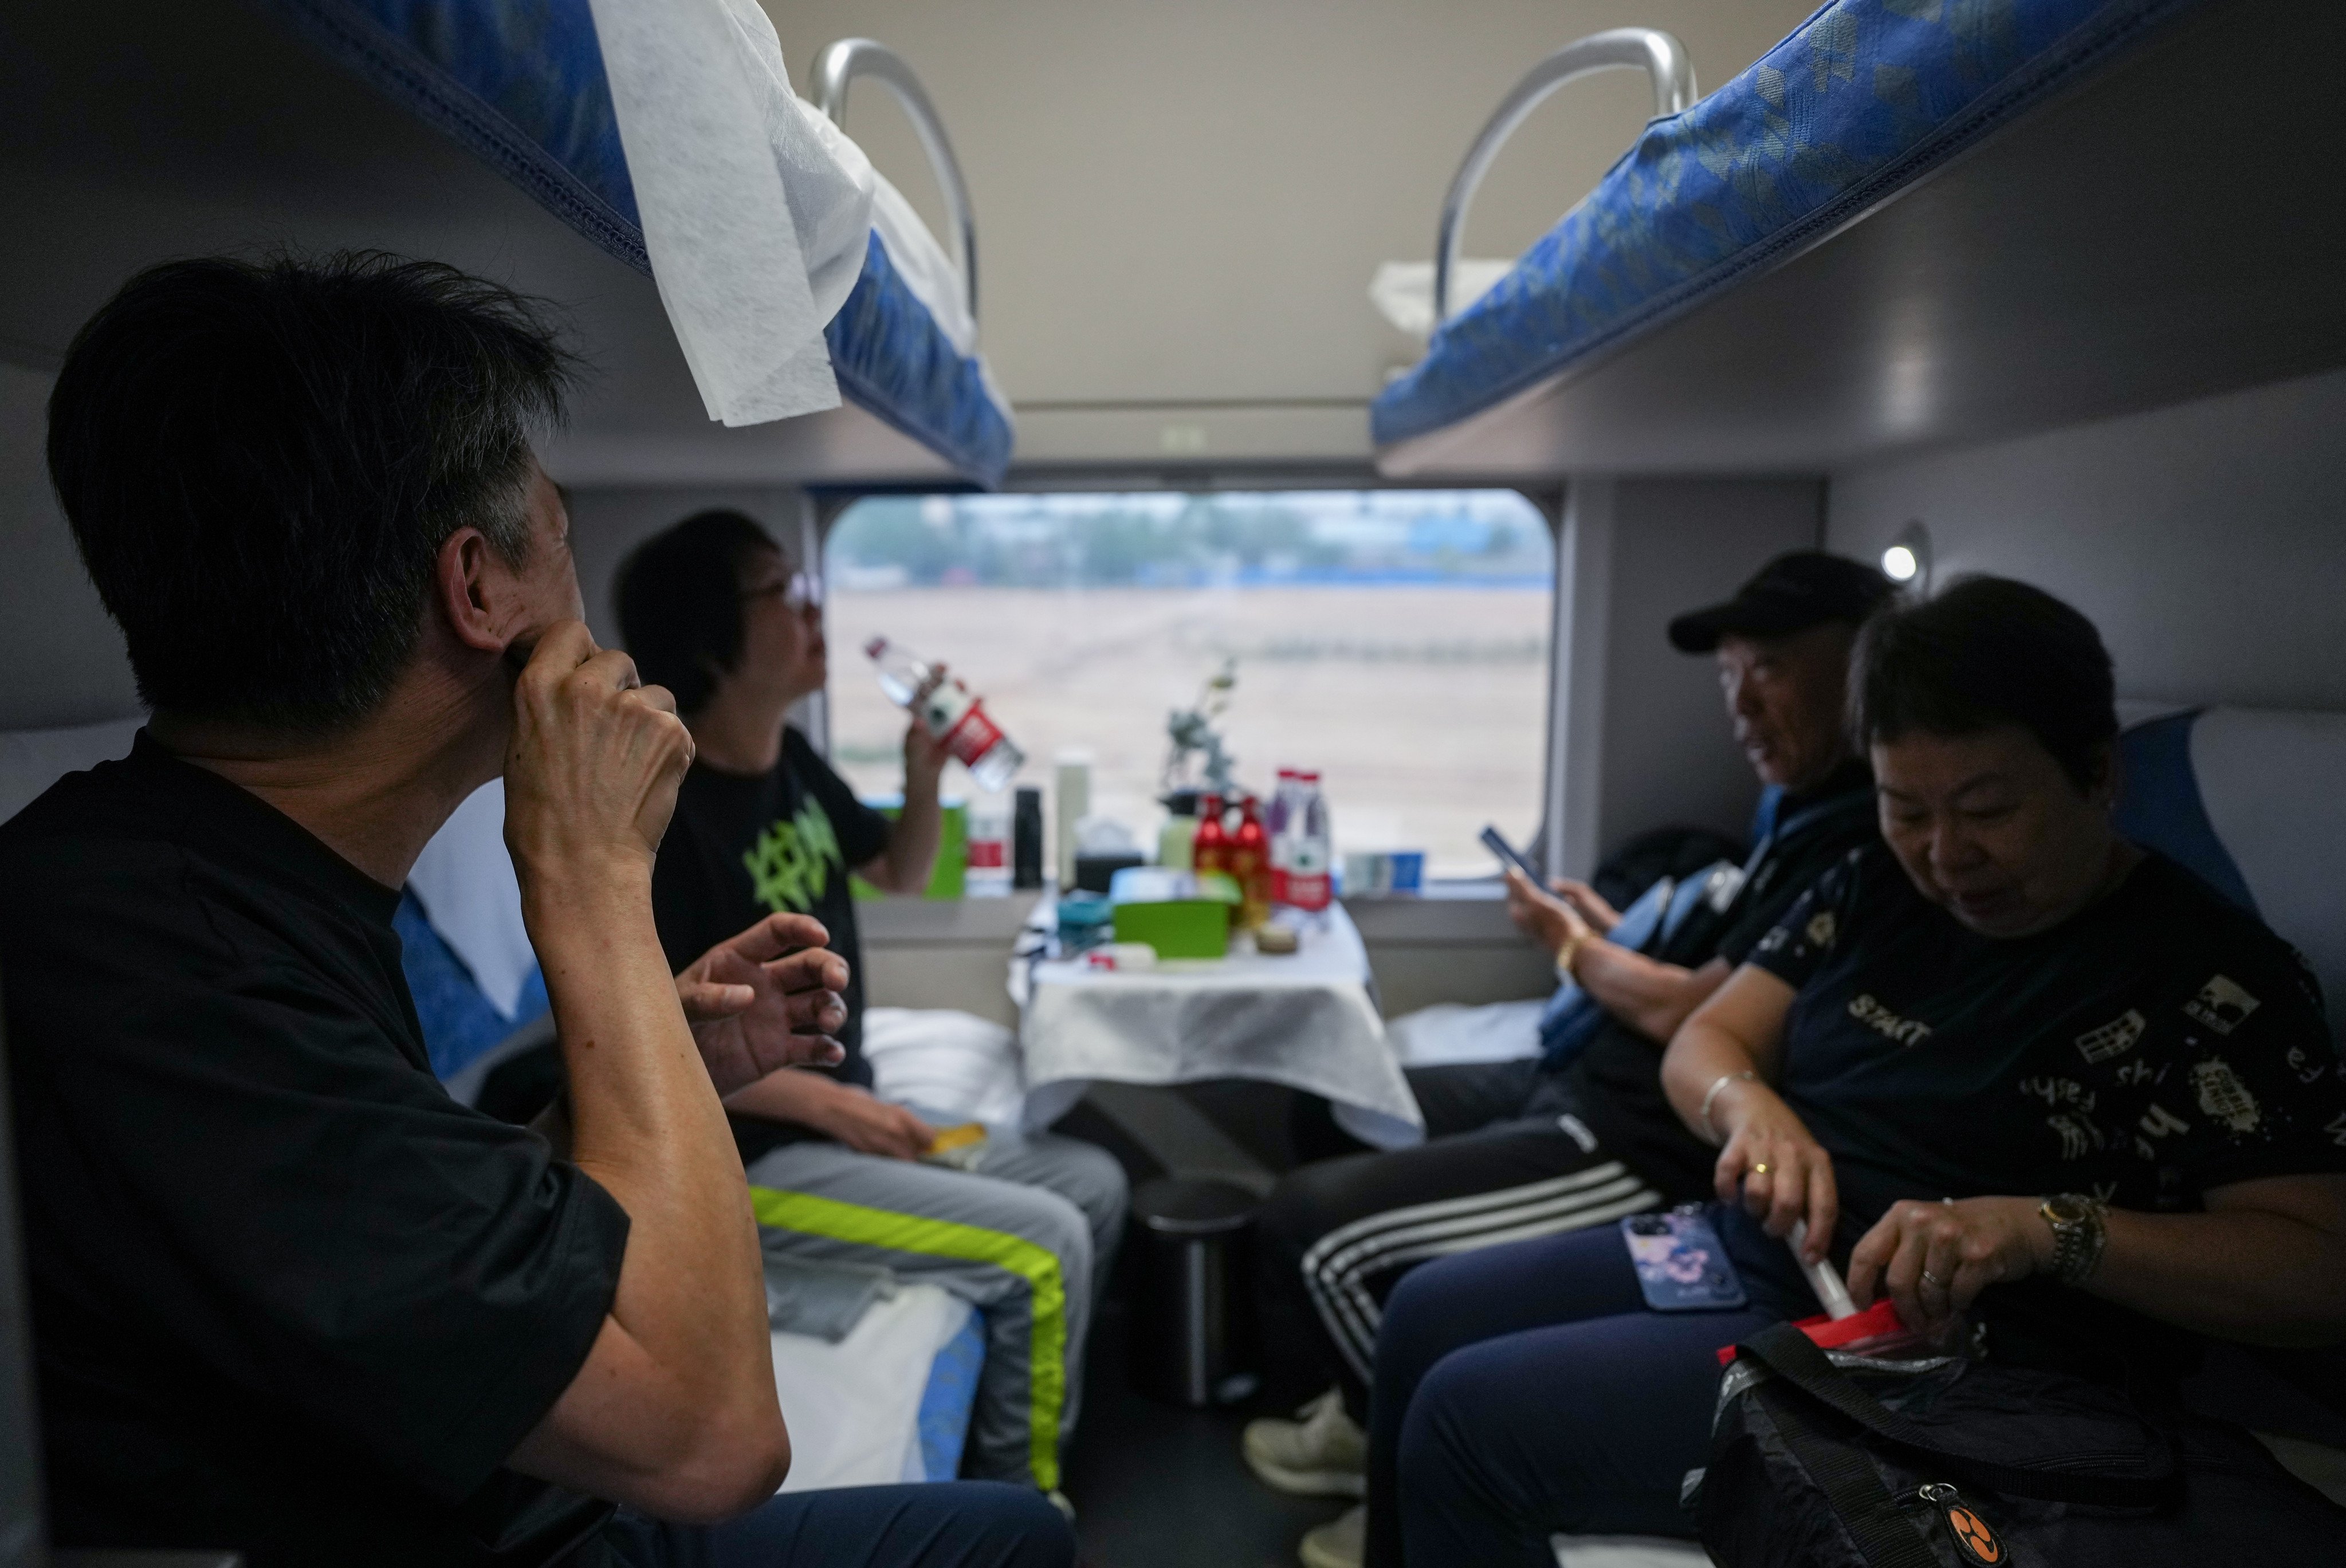 Some passengers have complained over a lack of charging facilities in the cabins. Photo: Elson Li